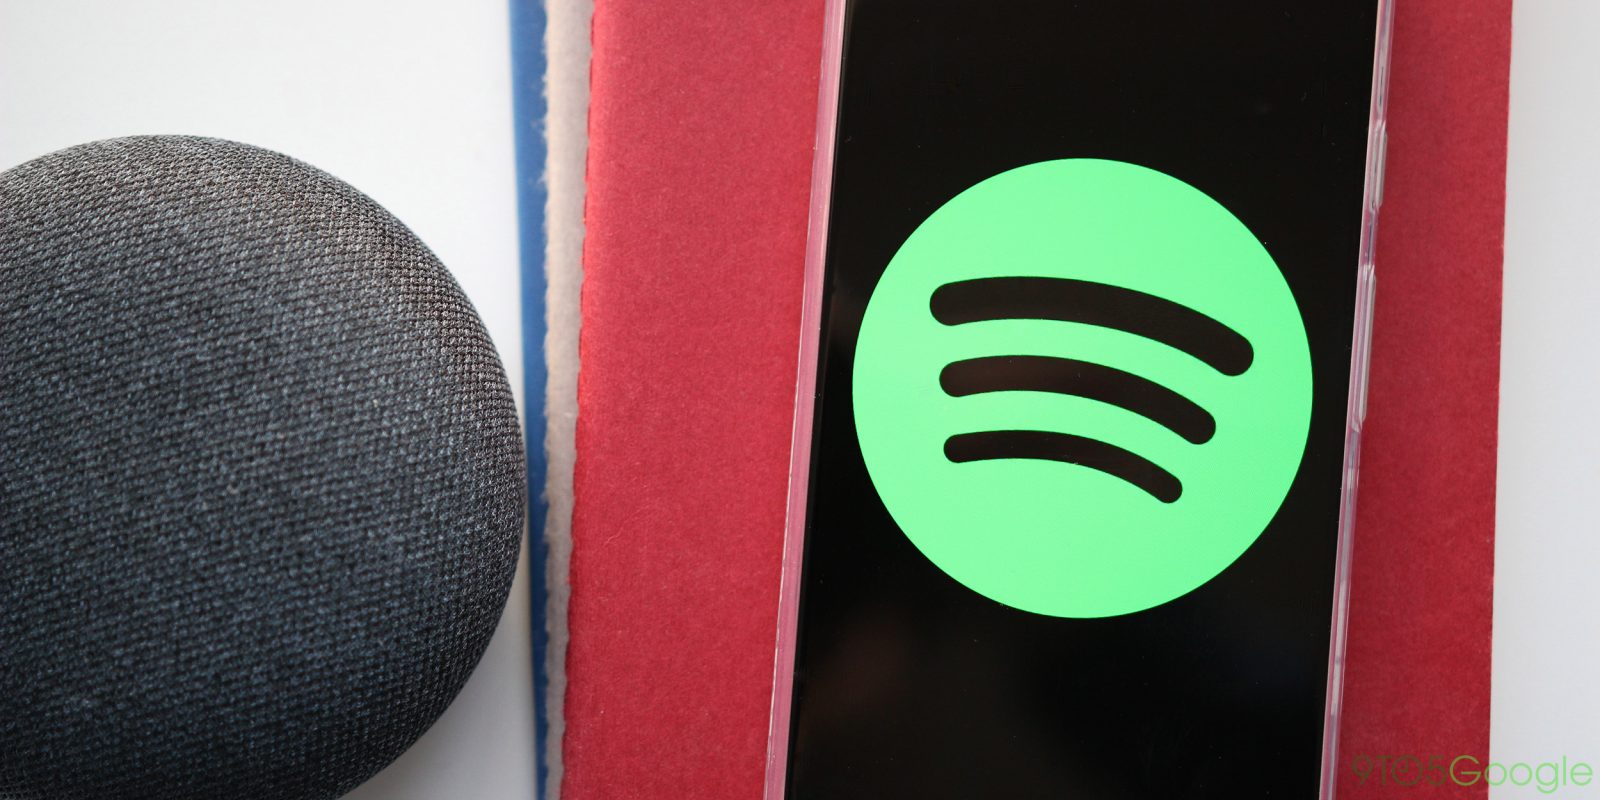 Do you get a free google home mini with spotify